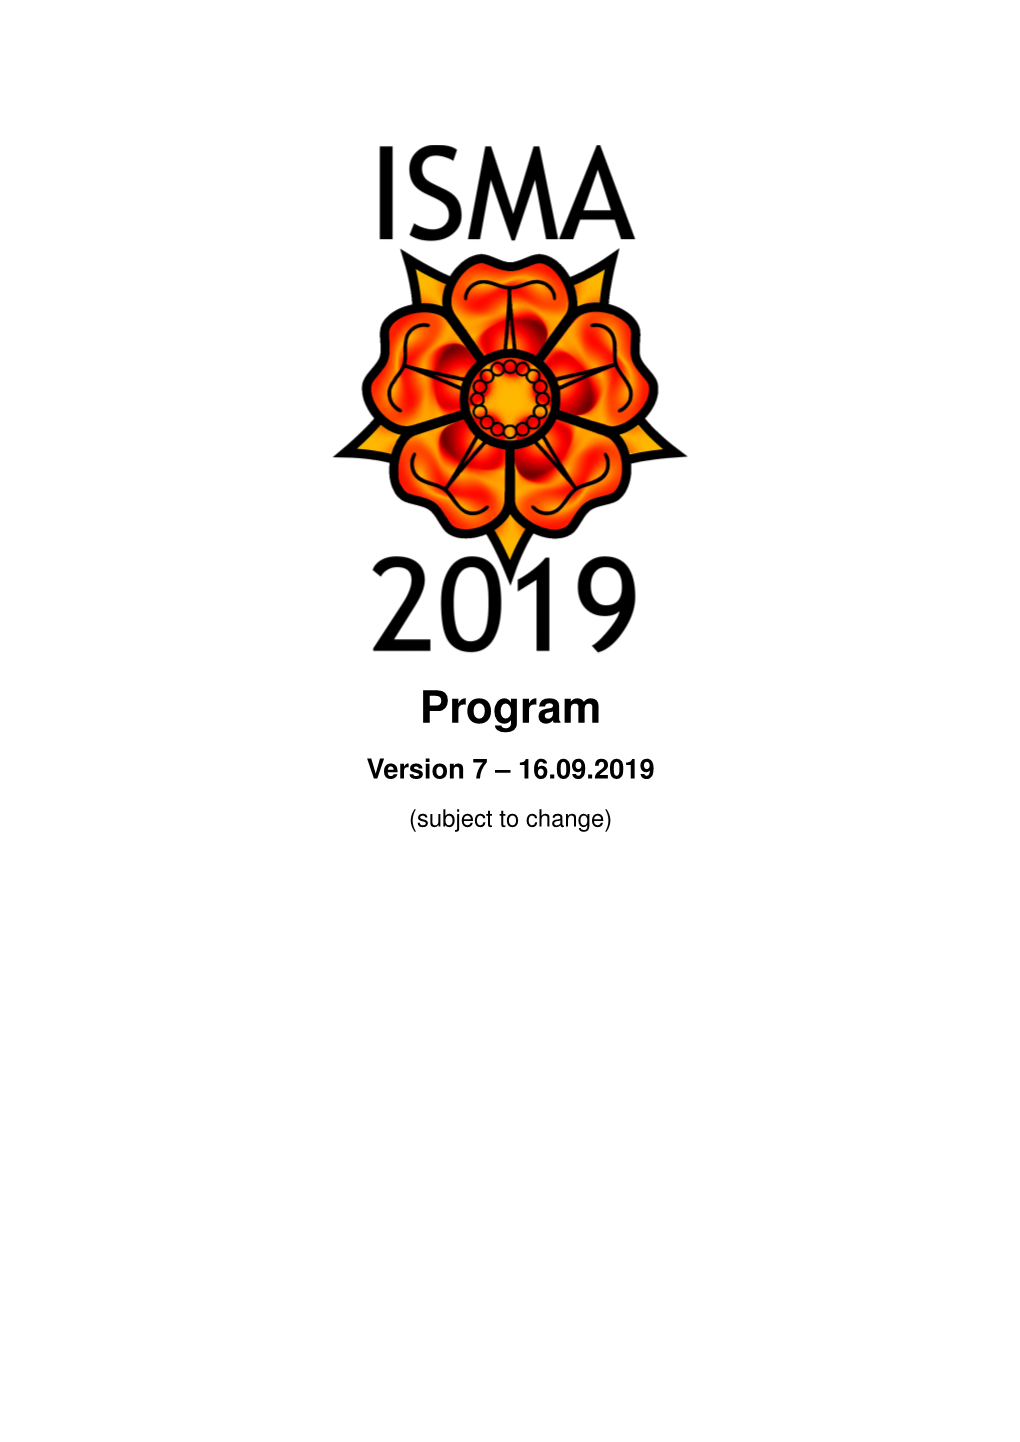 Program Version 7 – 16.09.2019 (Subject to Change) Contents